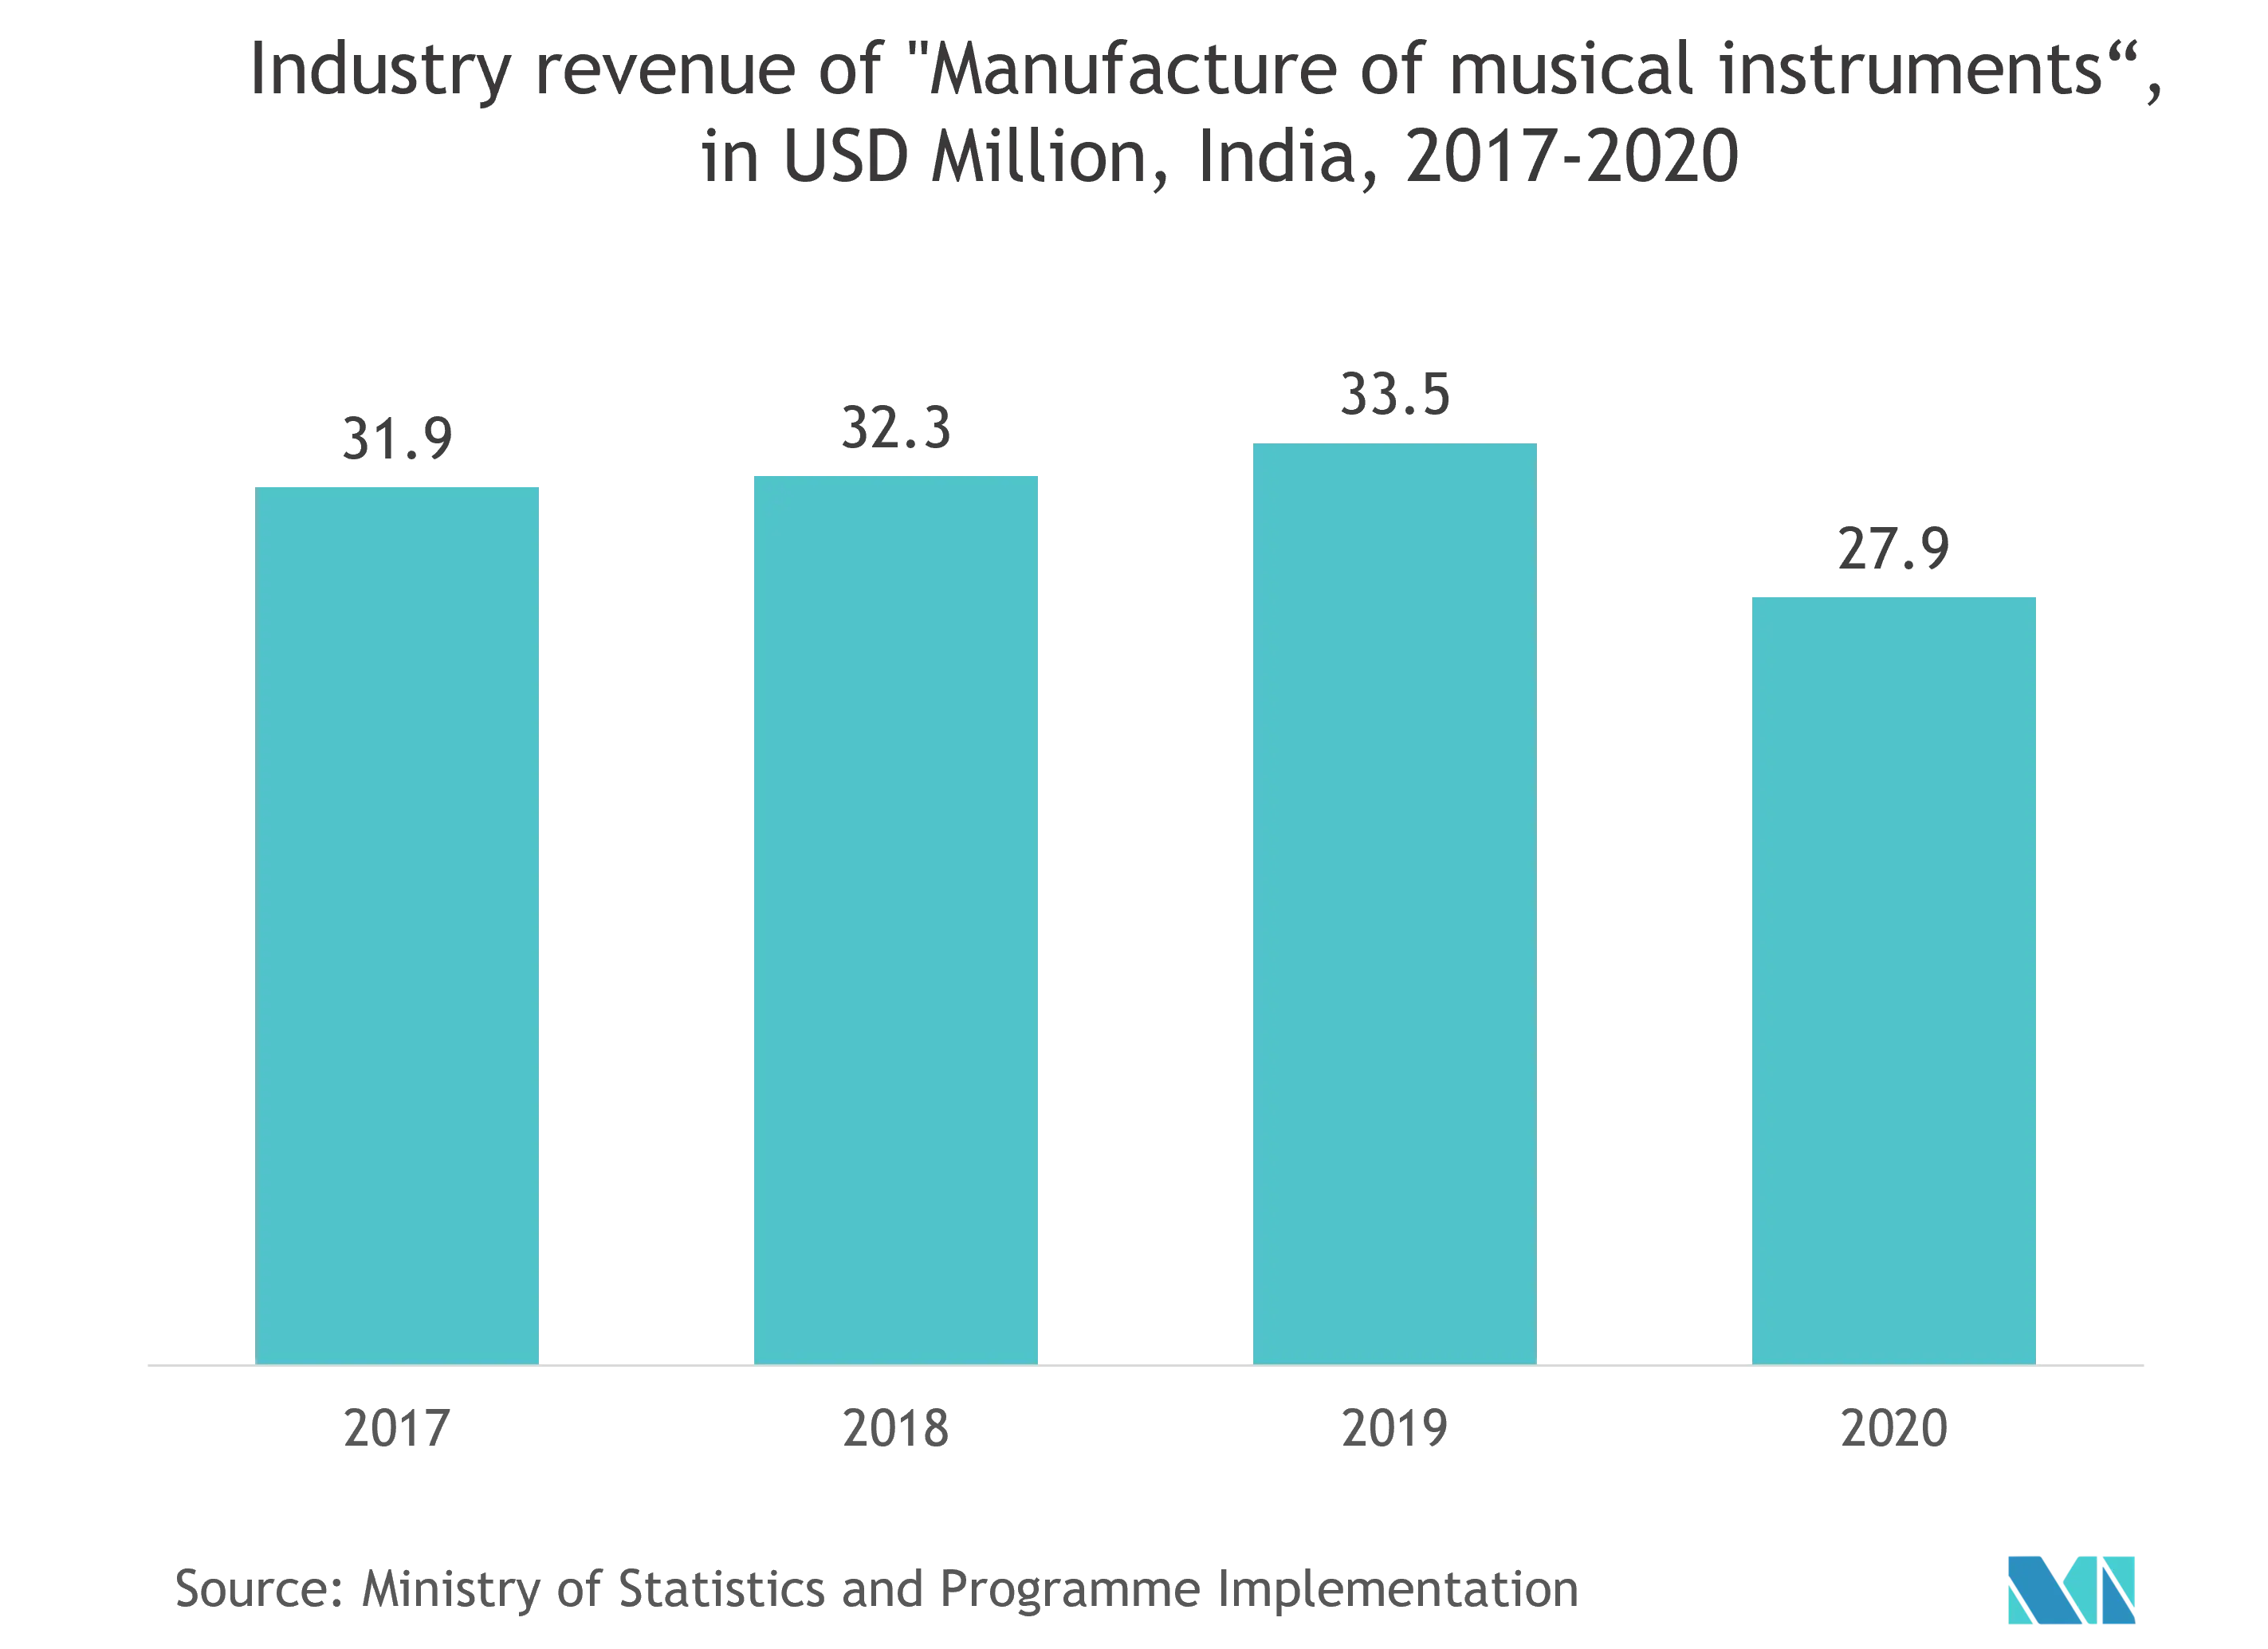 India Musical Instrument Market: Industry revenue of "Manufacture of musical instruments", in USD Million, India, 2017-2020